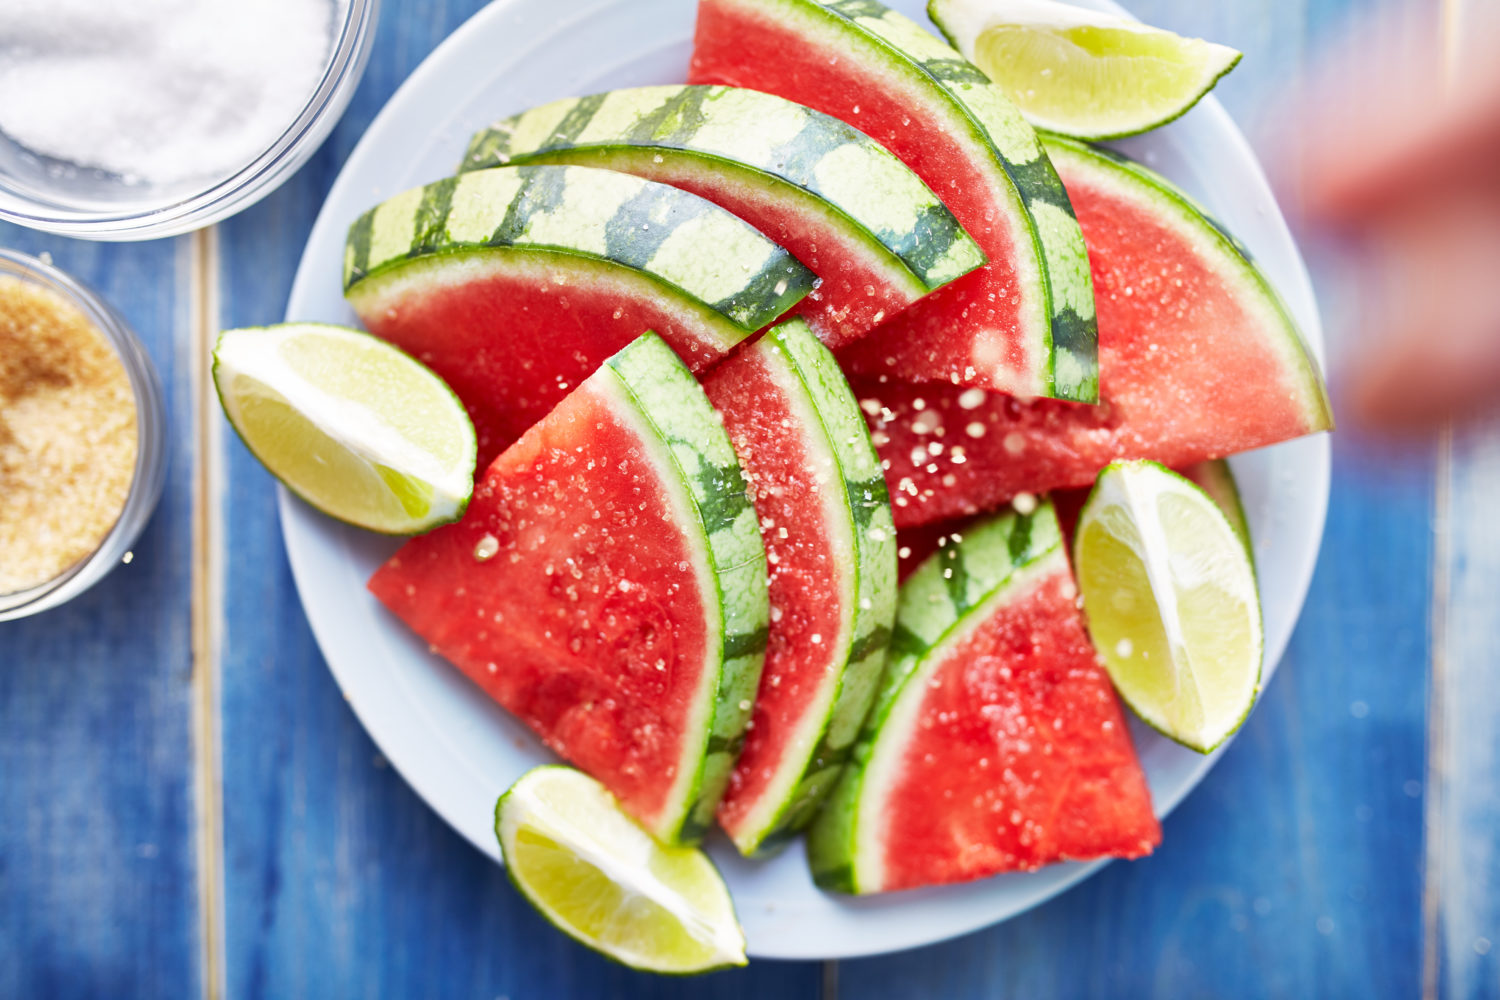 Settle These Food Debates and We’ll Guess Which Three Foods You Love the Most sprinkling salt on pile of watermelon slices